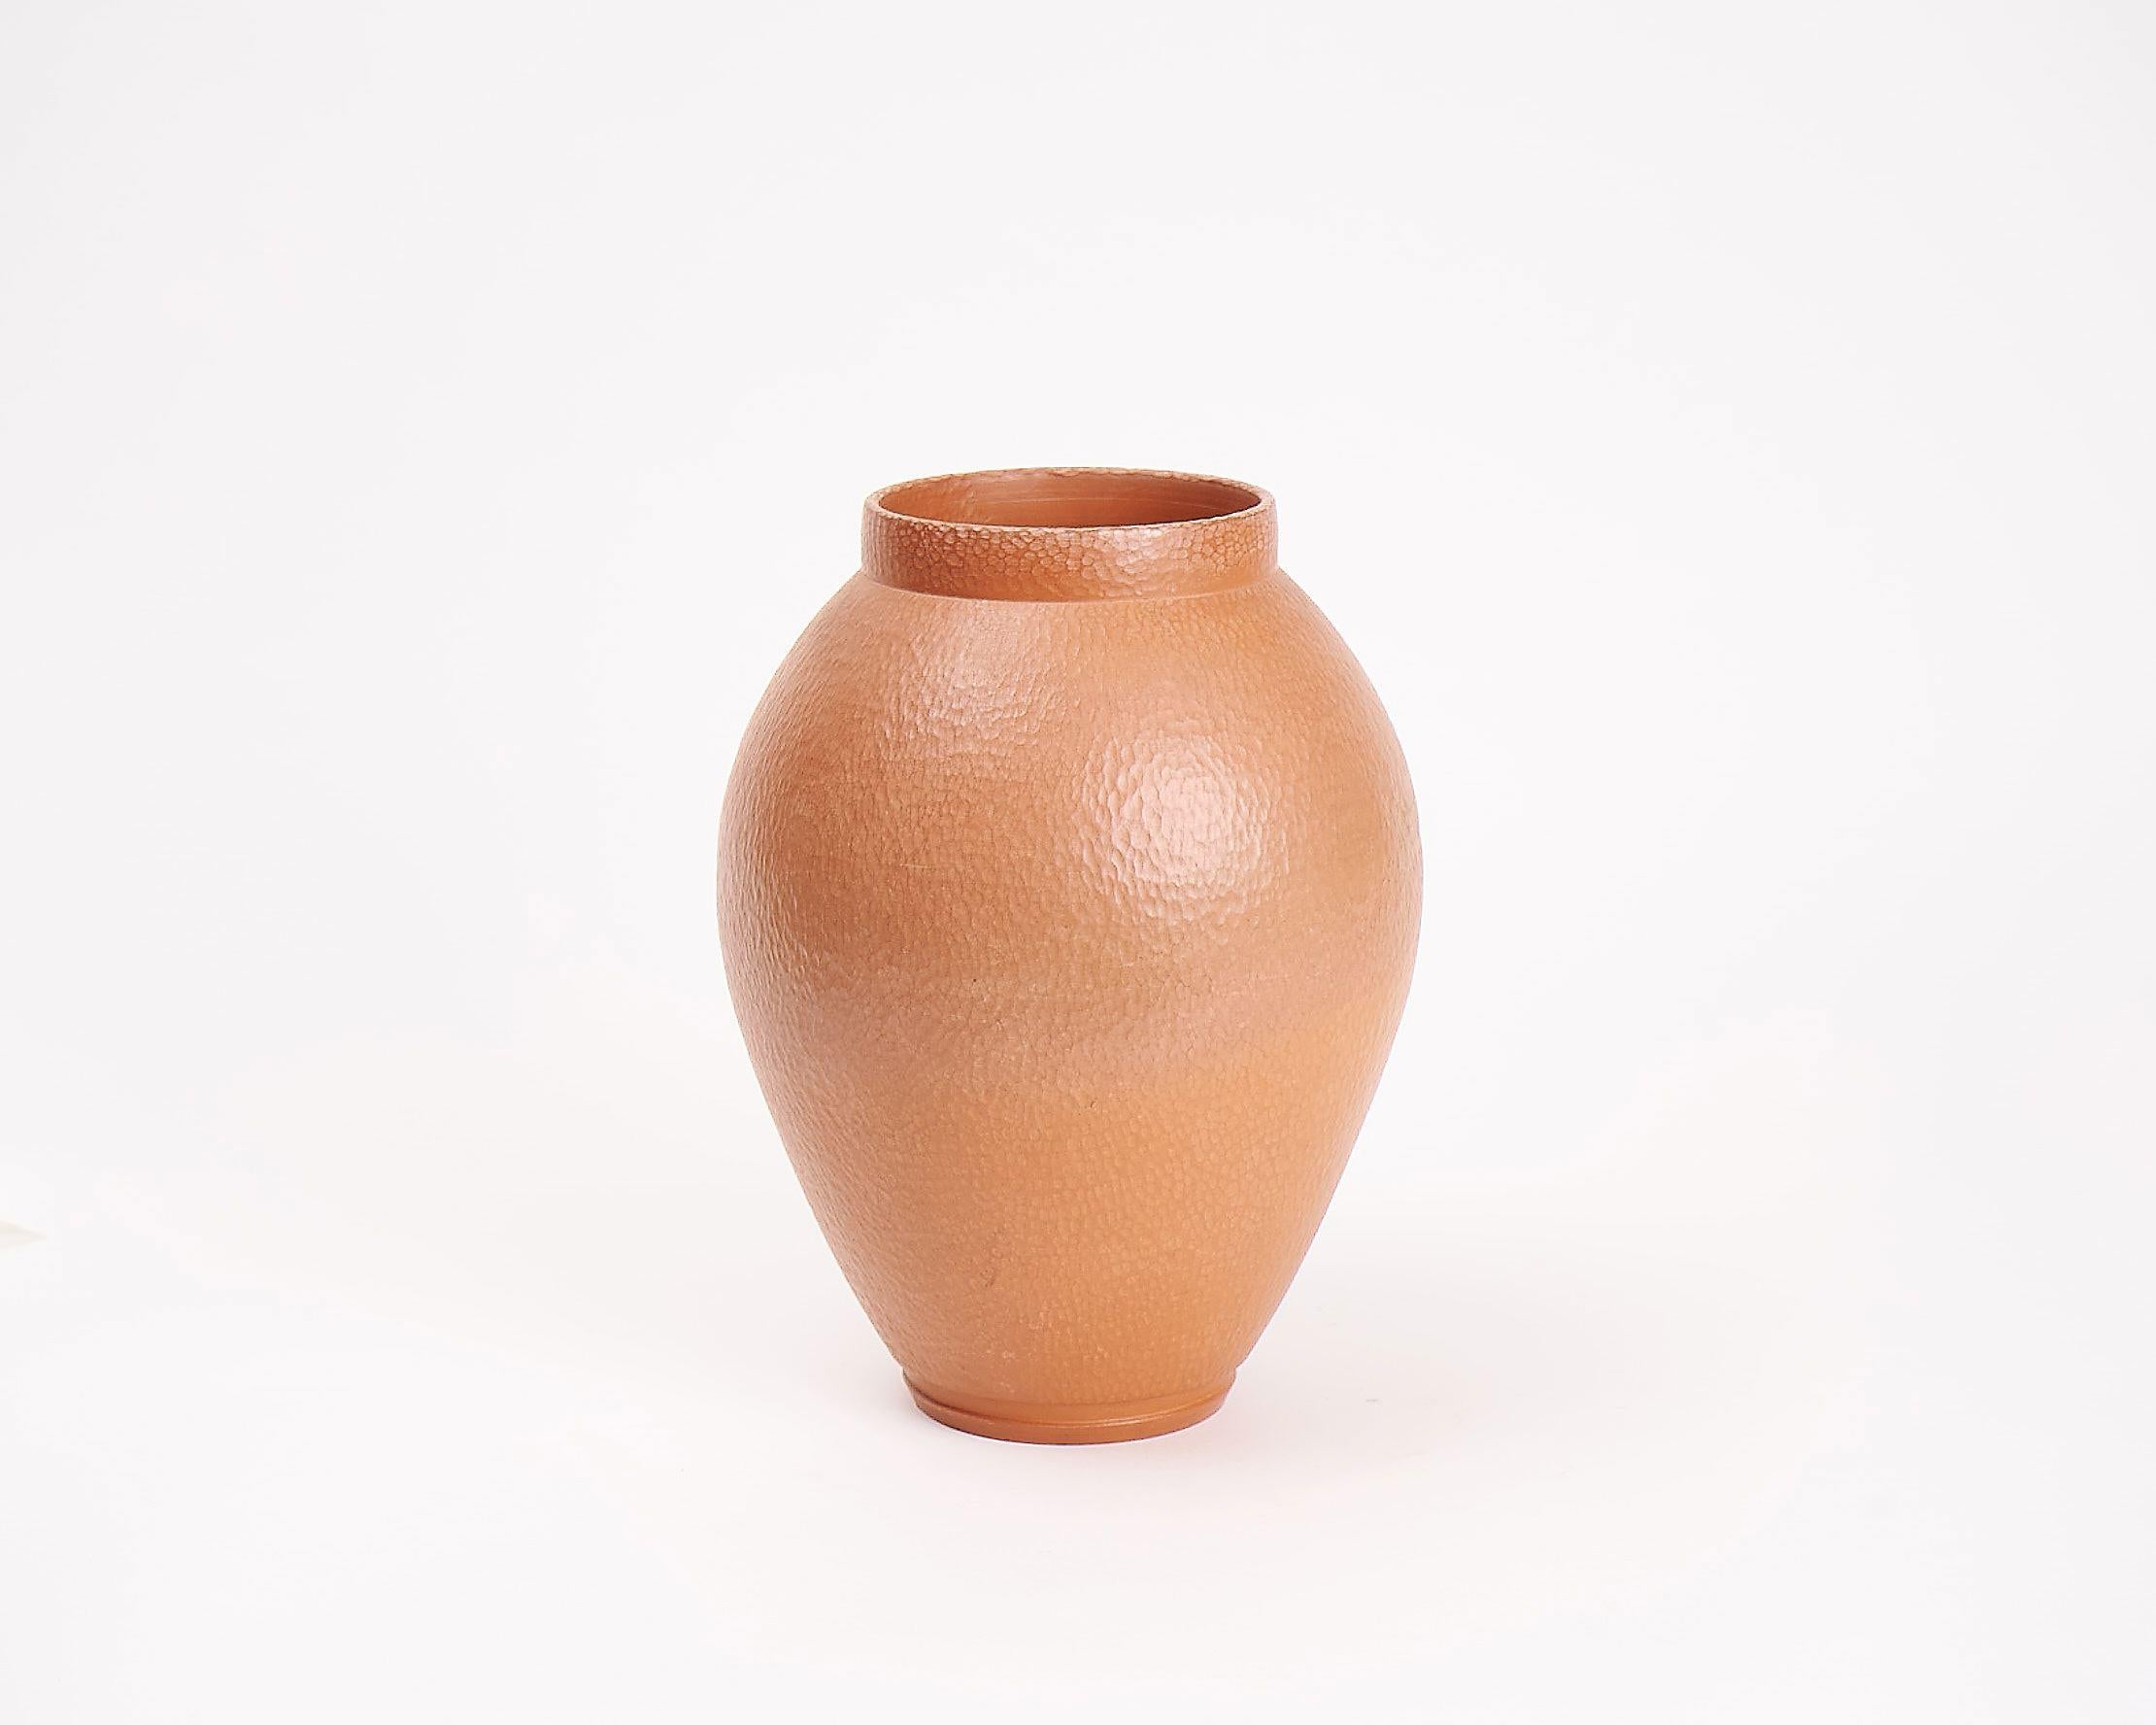 The glazed terracotta pots of Françoise Blondeau and AÏt Lhaj Hassan possess a symmetry and balance that pits their natural, earthy medium against an elegant beauty specific to man-made objects.